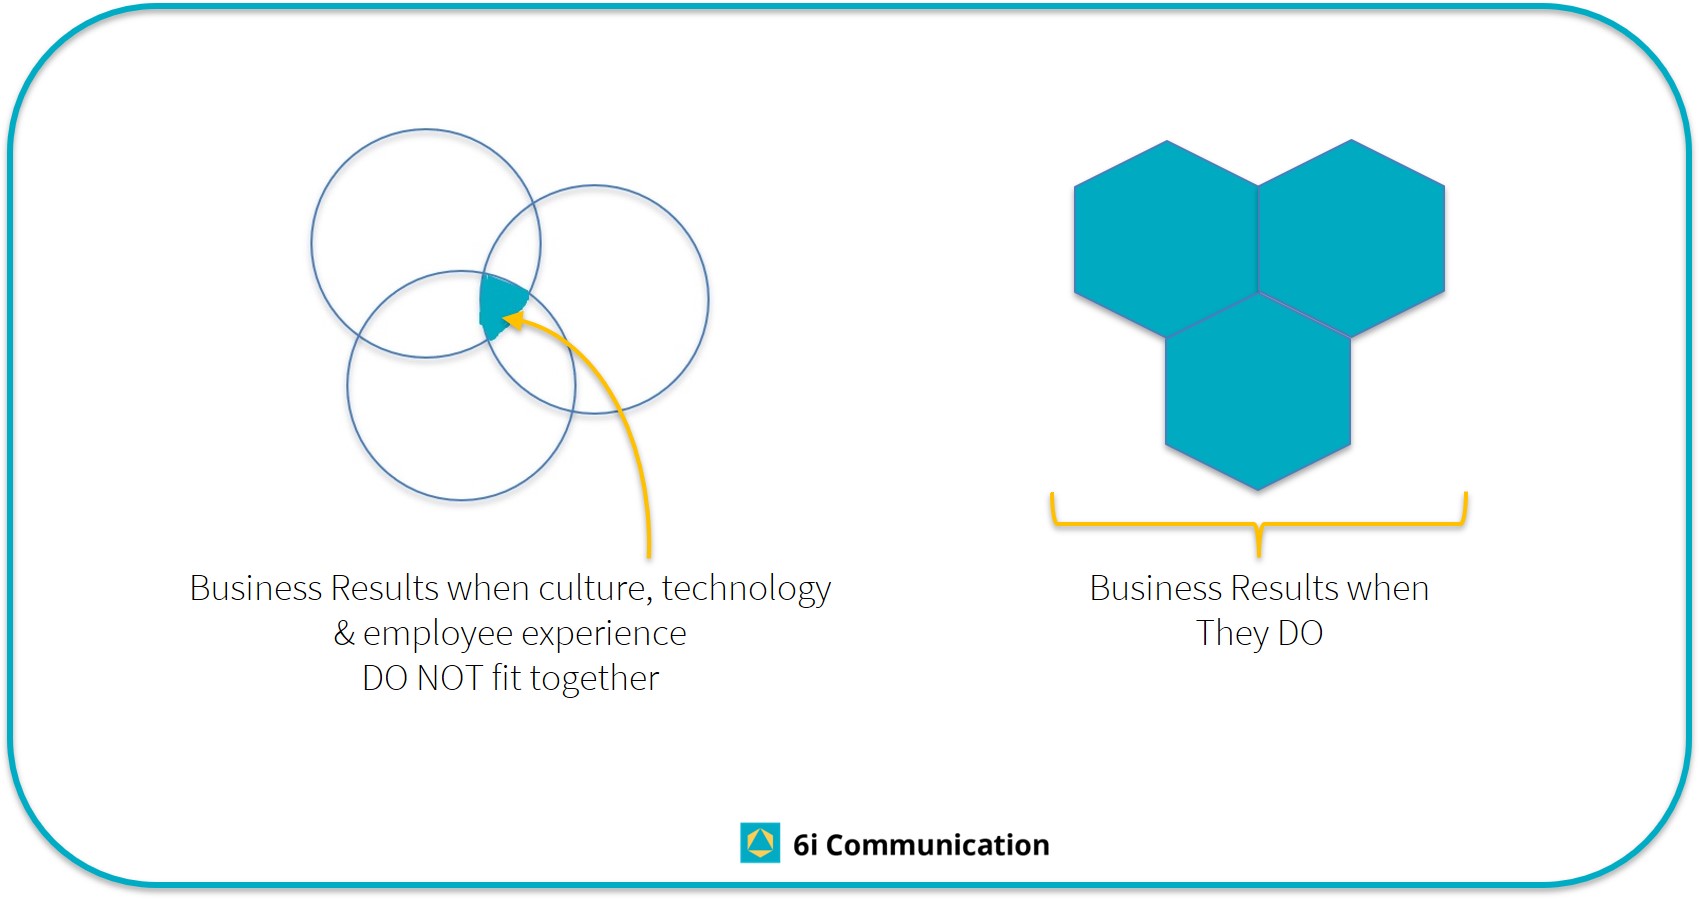 When culture, technology and employee experience actually fit together good things will happen